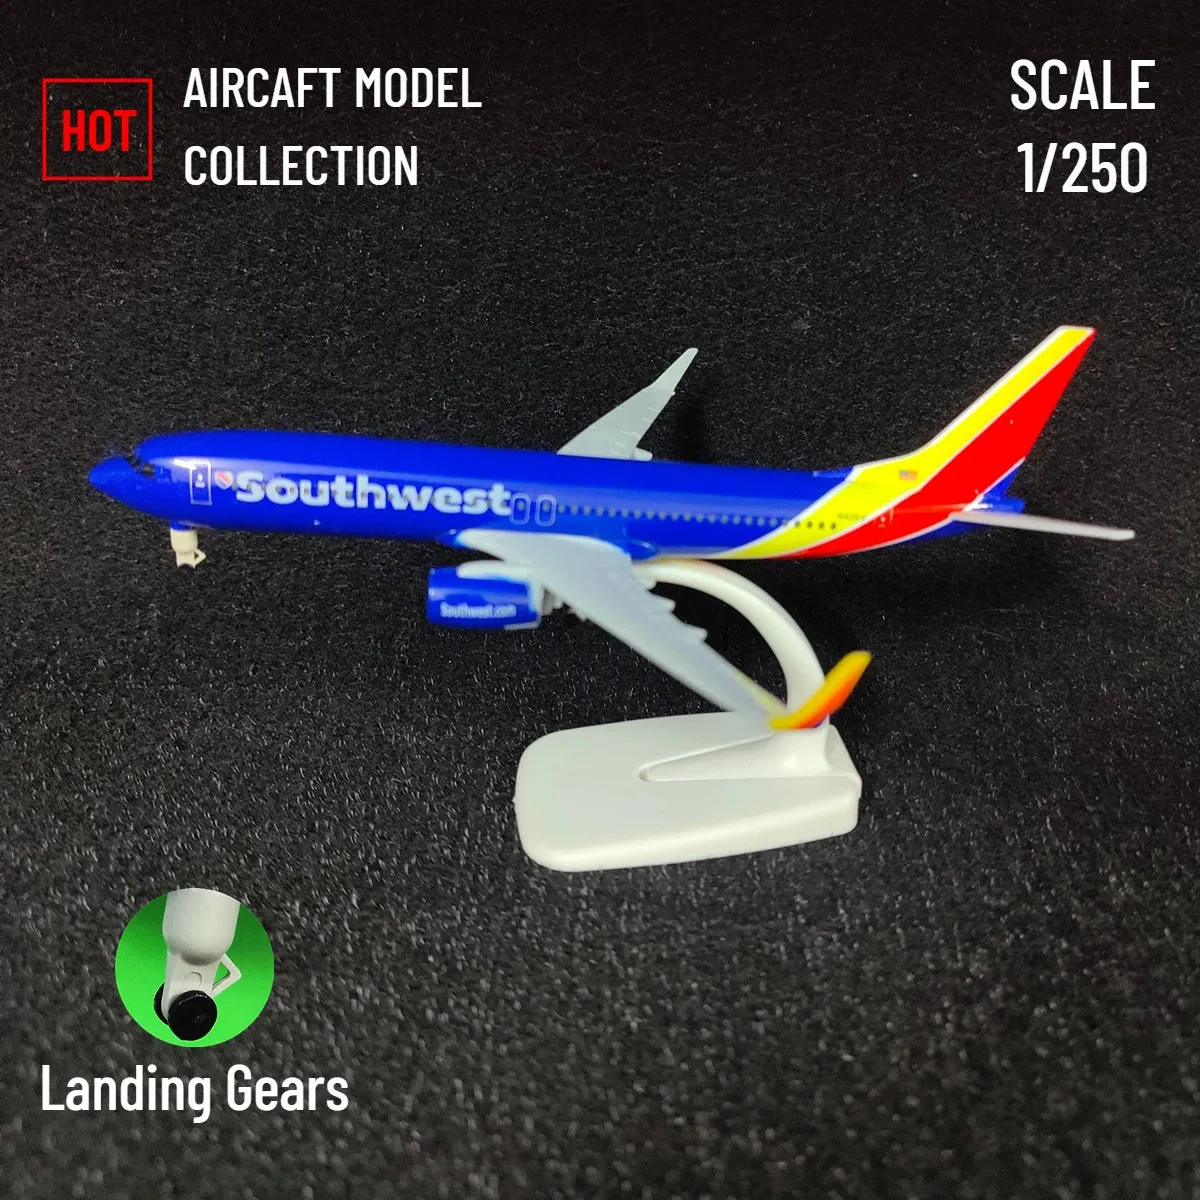 Skala 1 250 Metal Aircraft Model Replica Southwest Airlines B737 Airplane Aviation Decor Miniature Art Collection Kid Boy Toy 240115